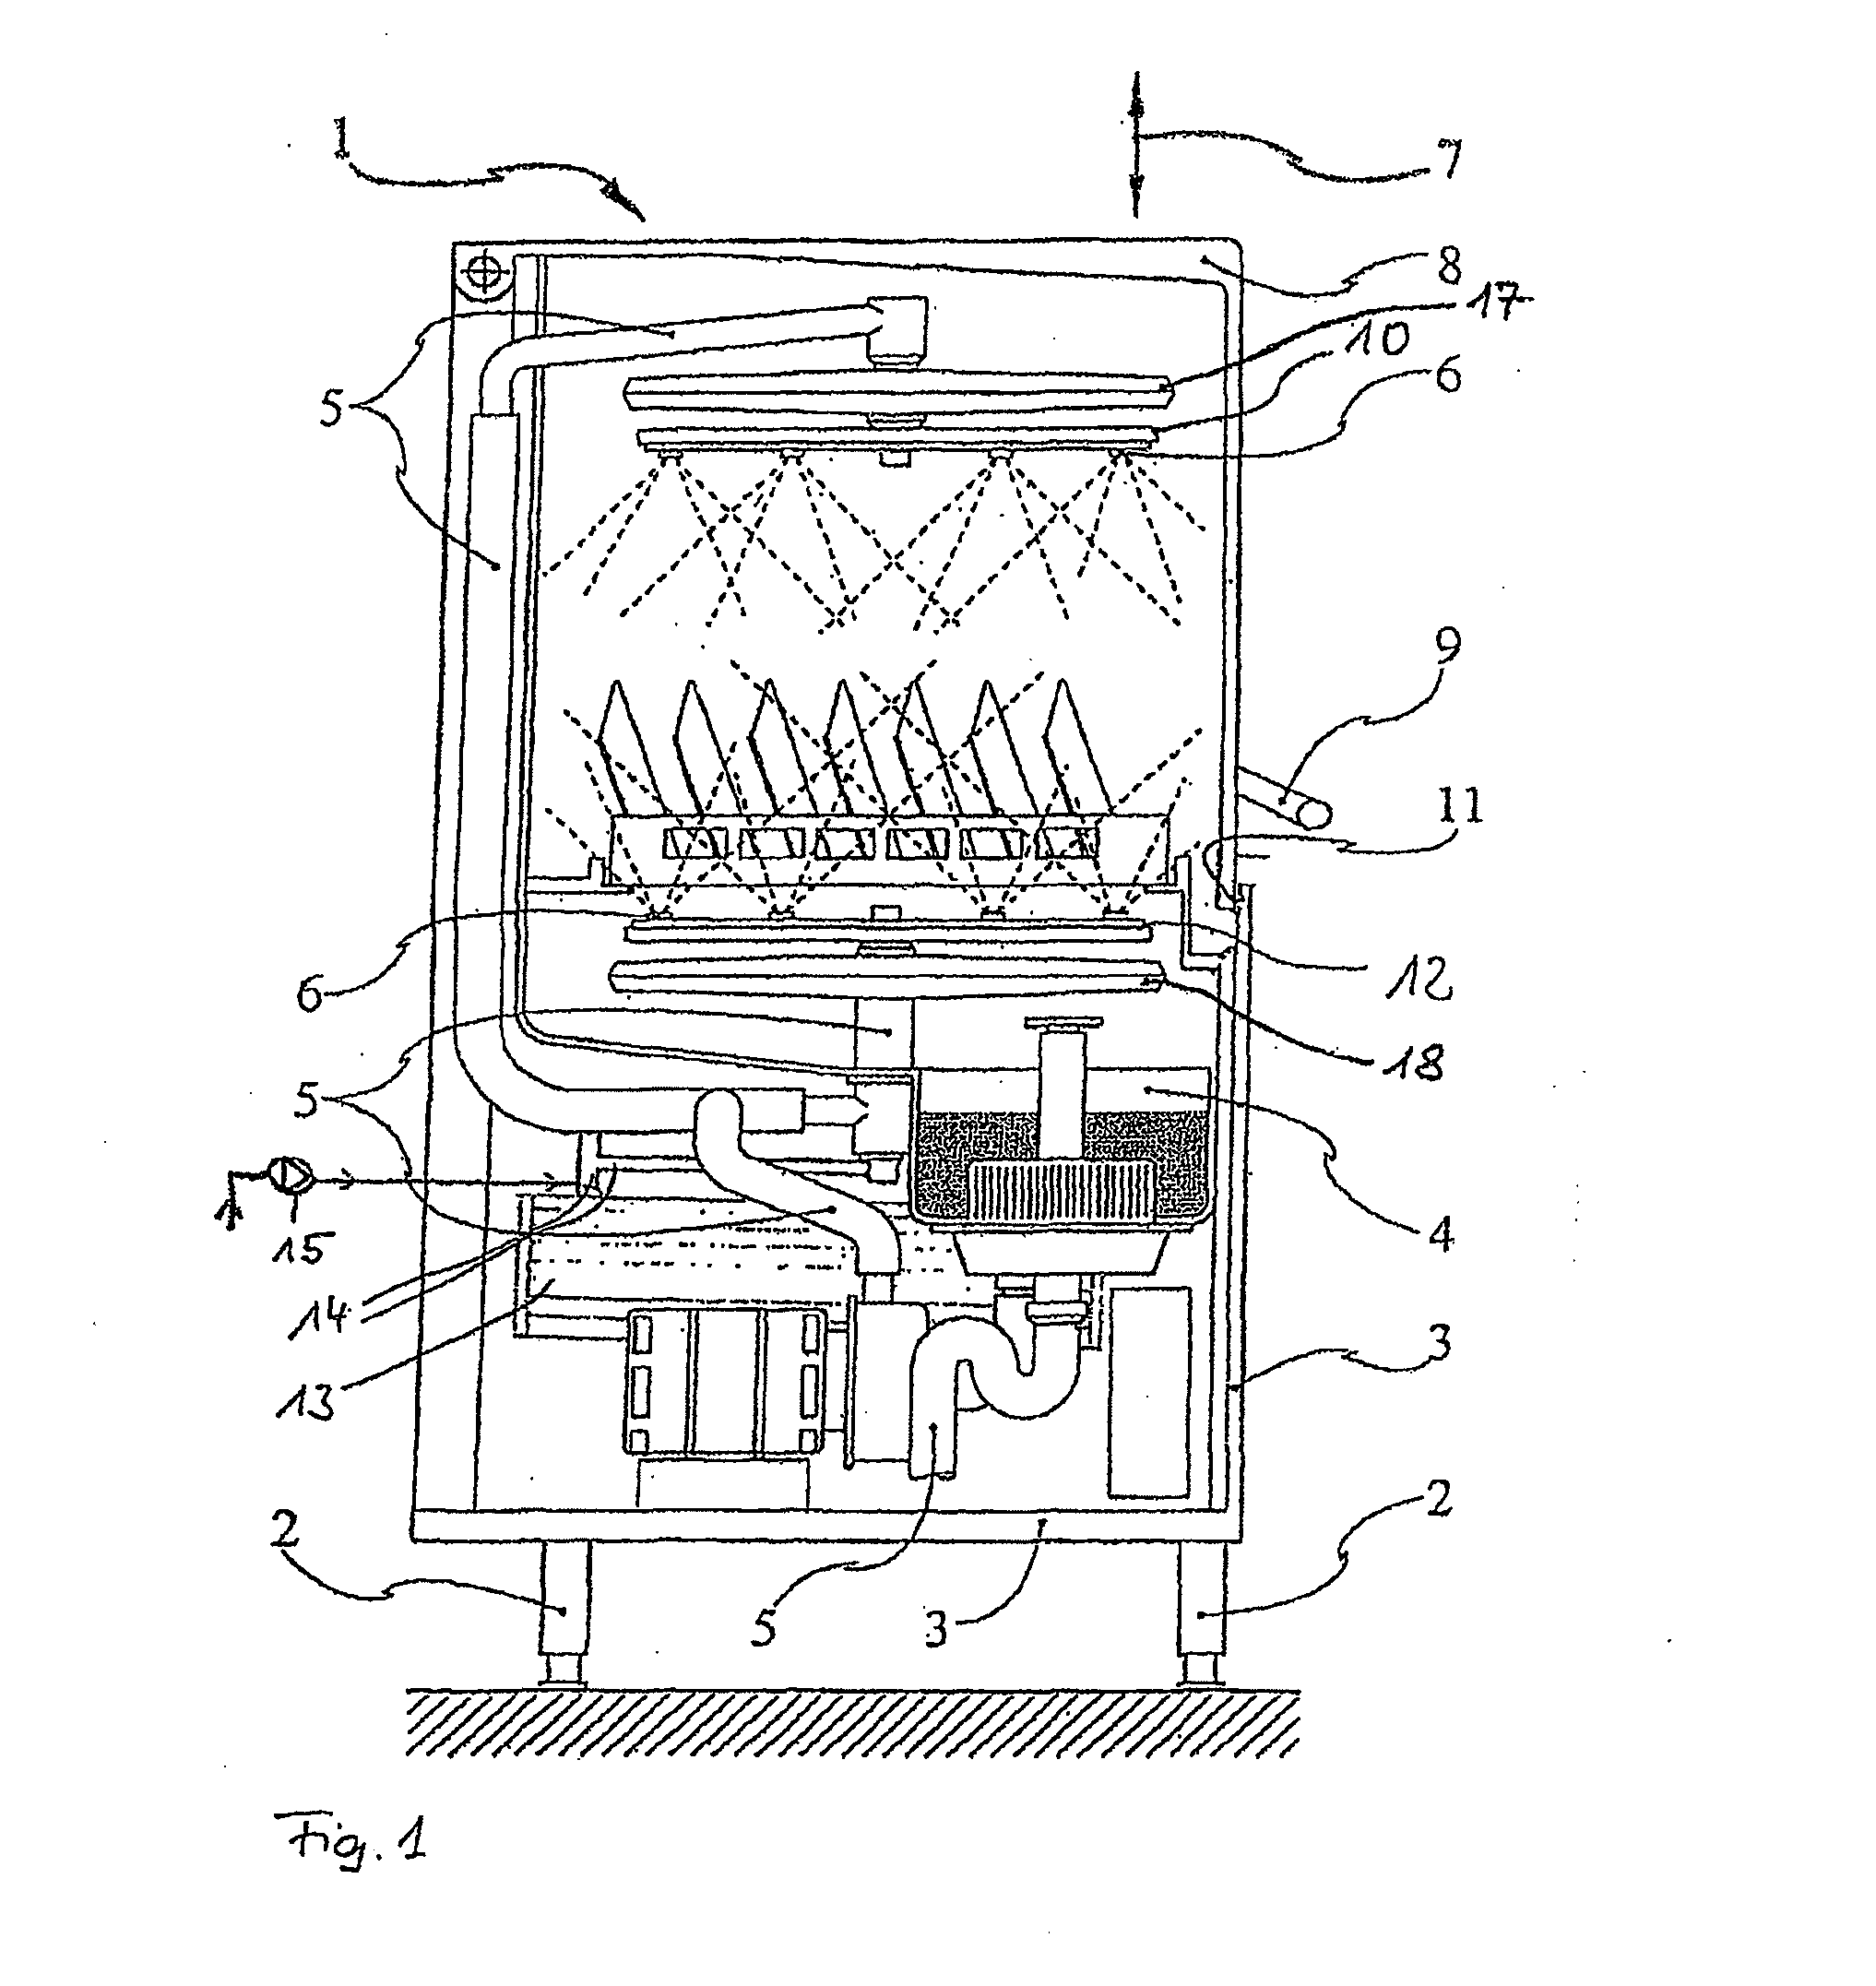 Concentrated warewashing compositions and methods